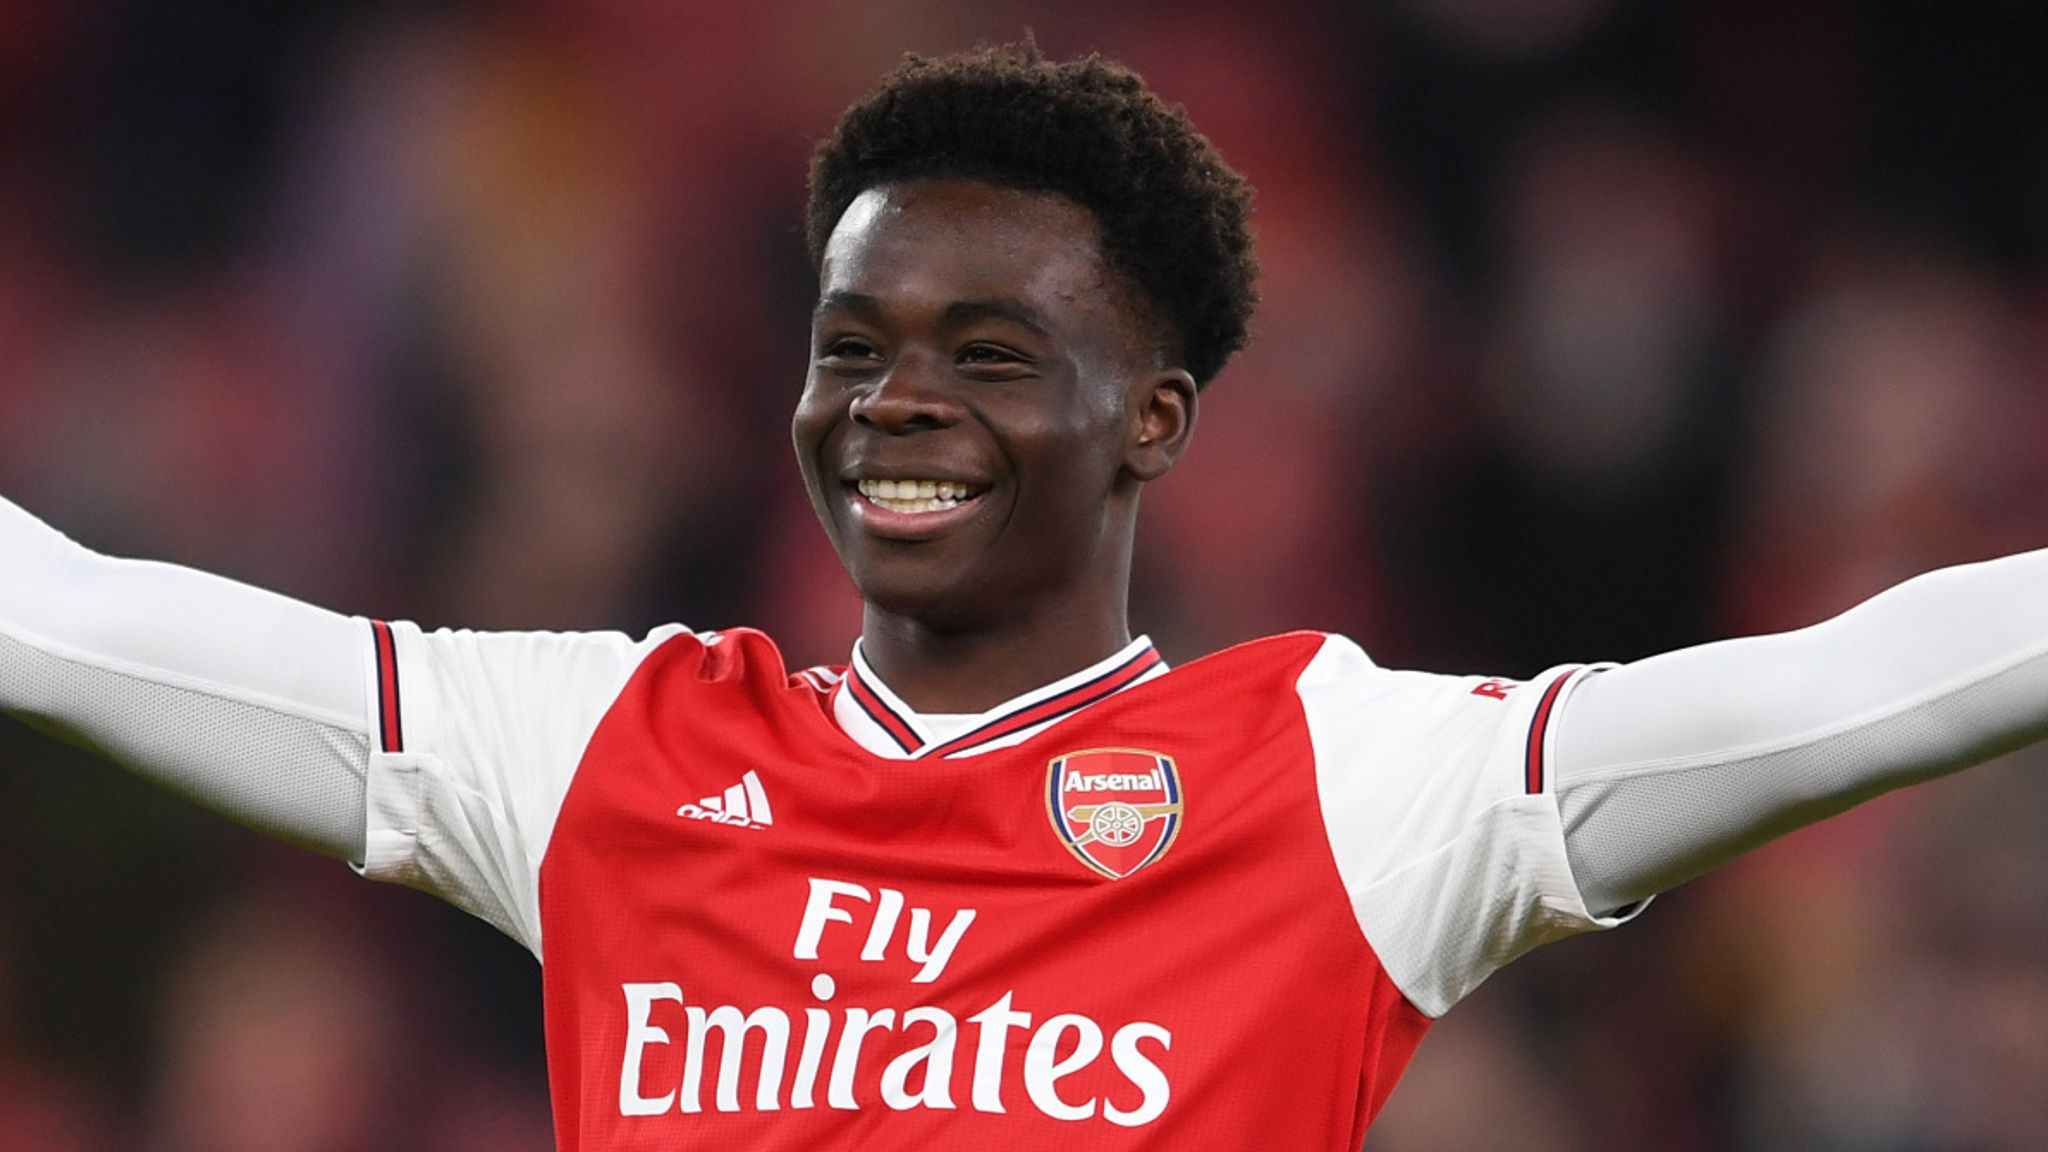  Bukayo Saka, a young Arsenal football player, is celebrating a goal with his arms outstretched.